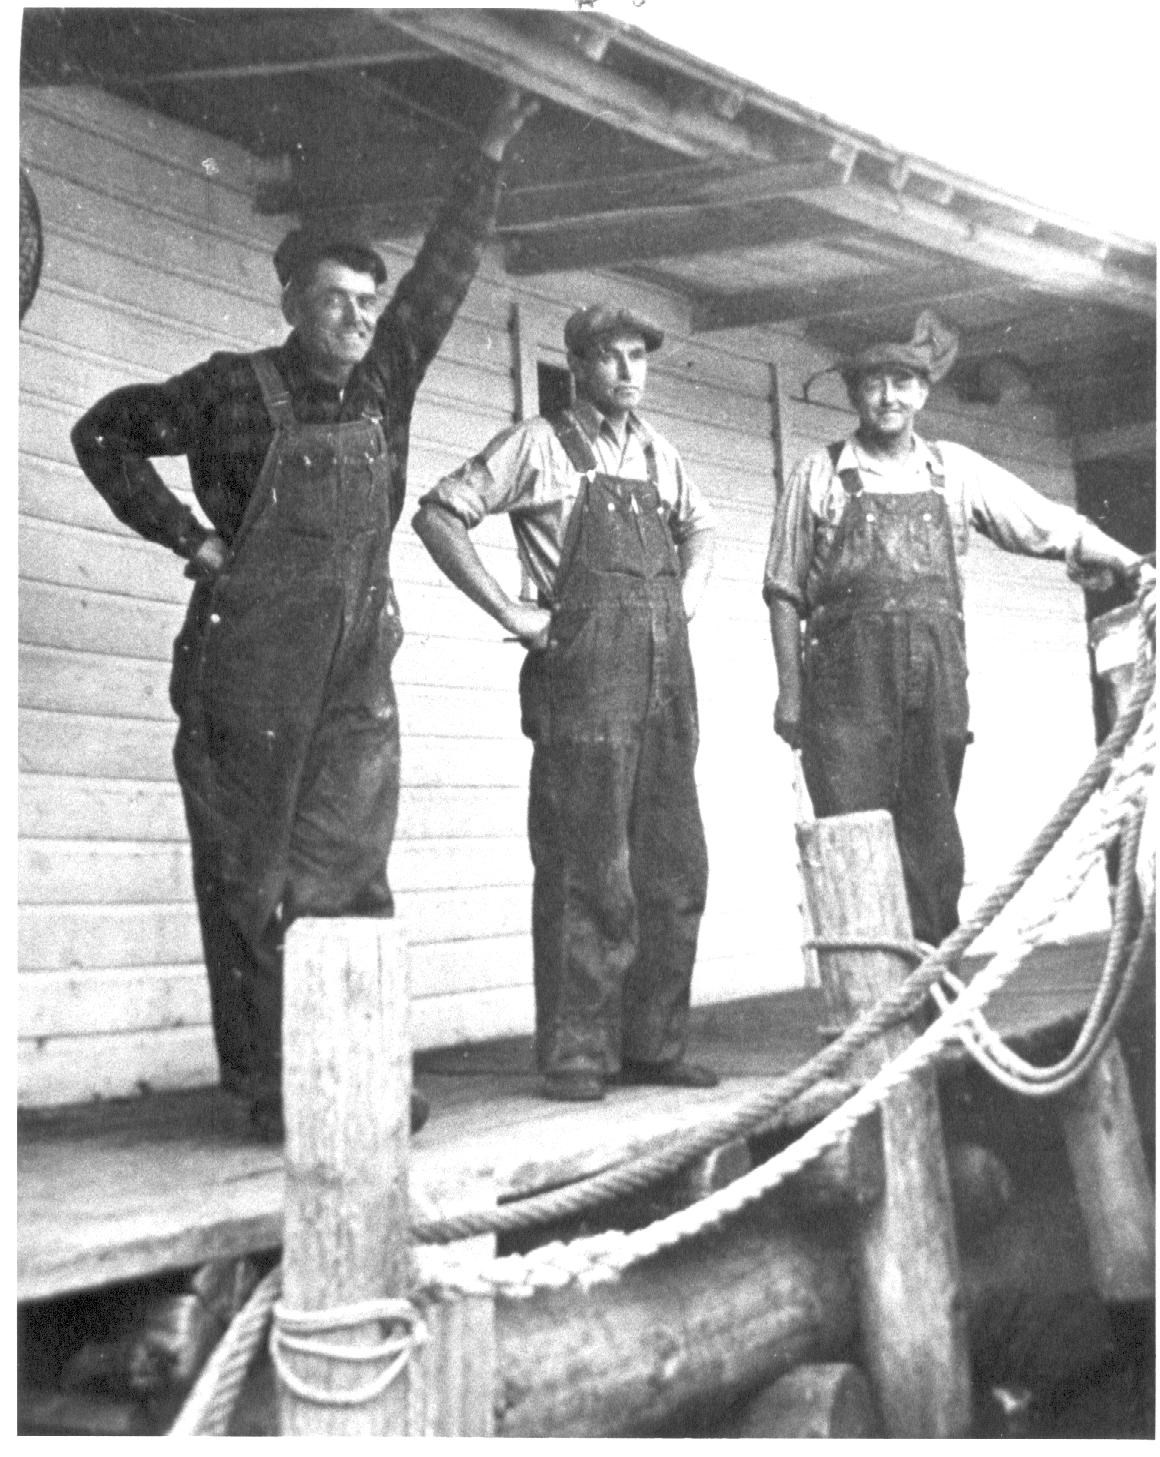 Three men standing under the eave of a building with mooring ropes across the bottom right corned of the photo.